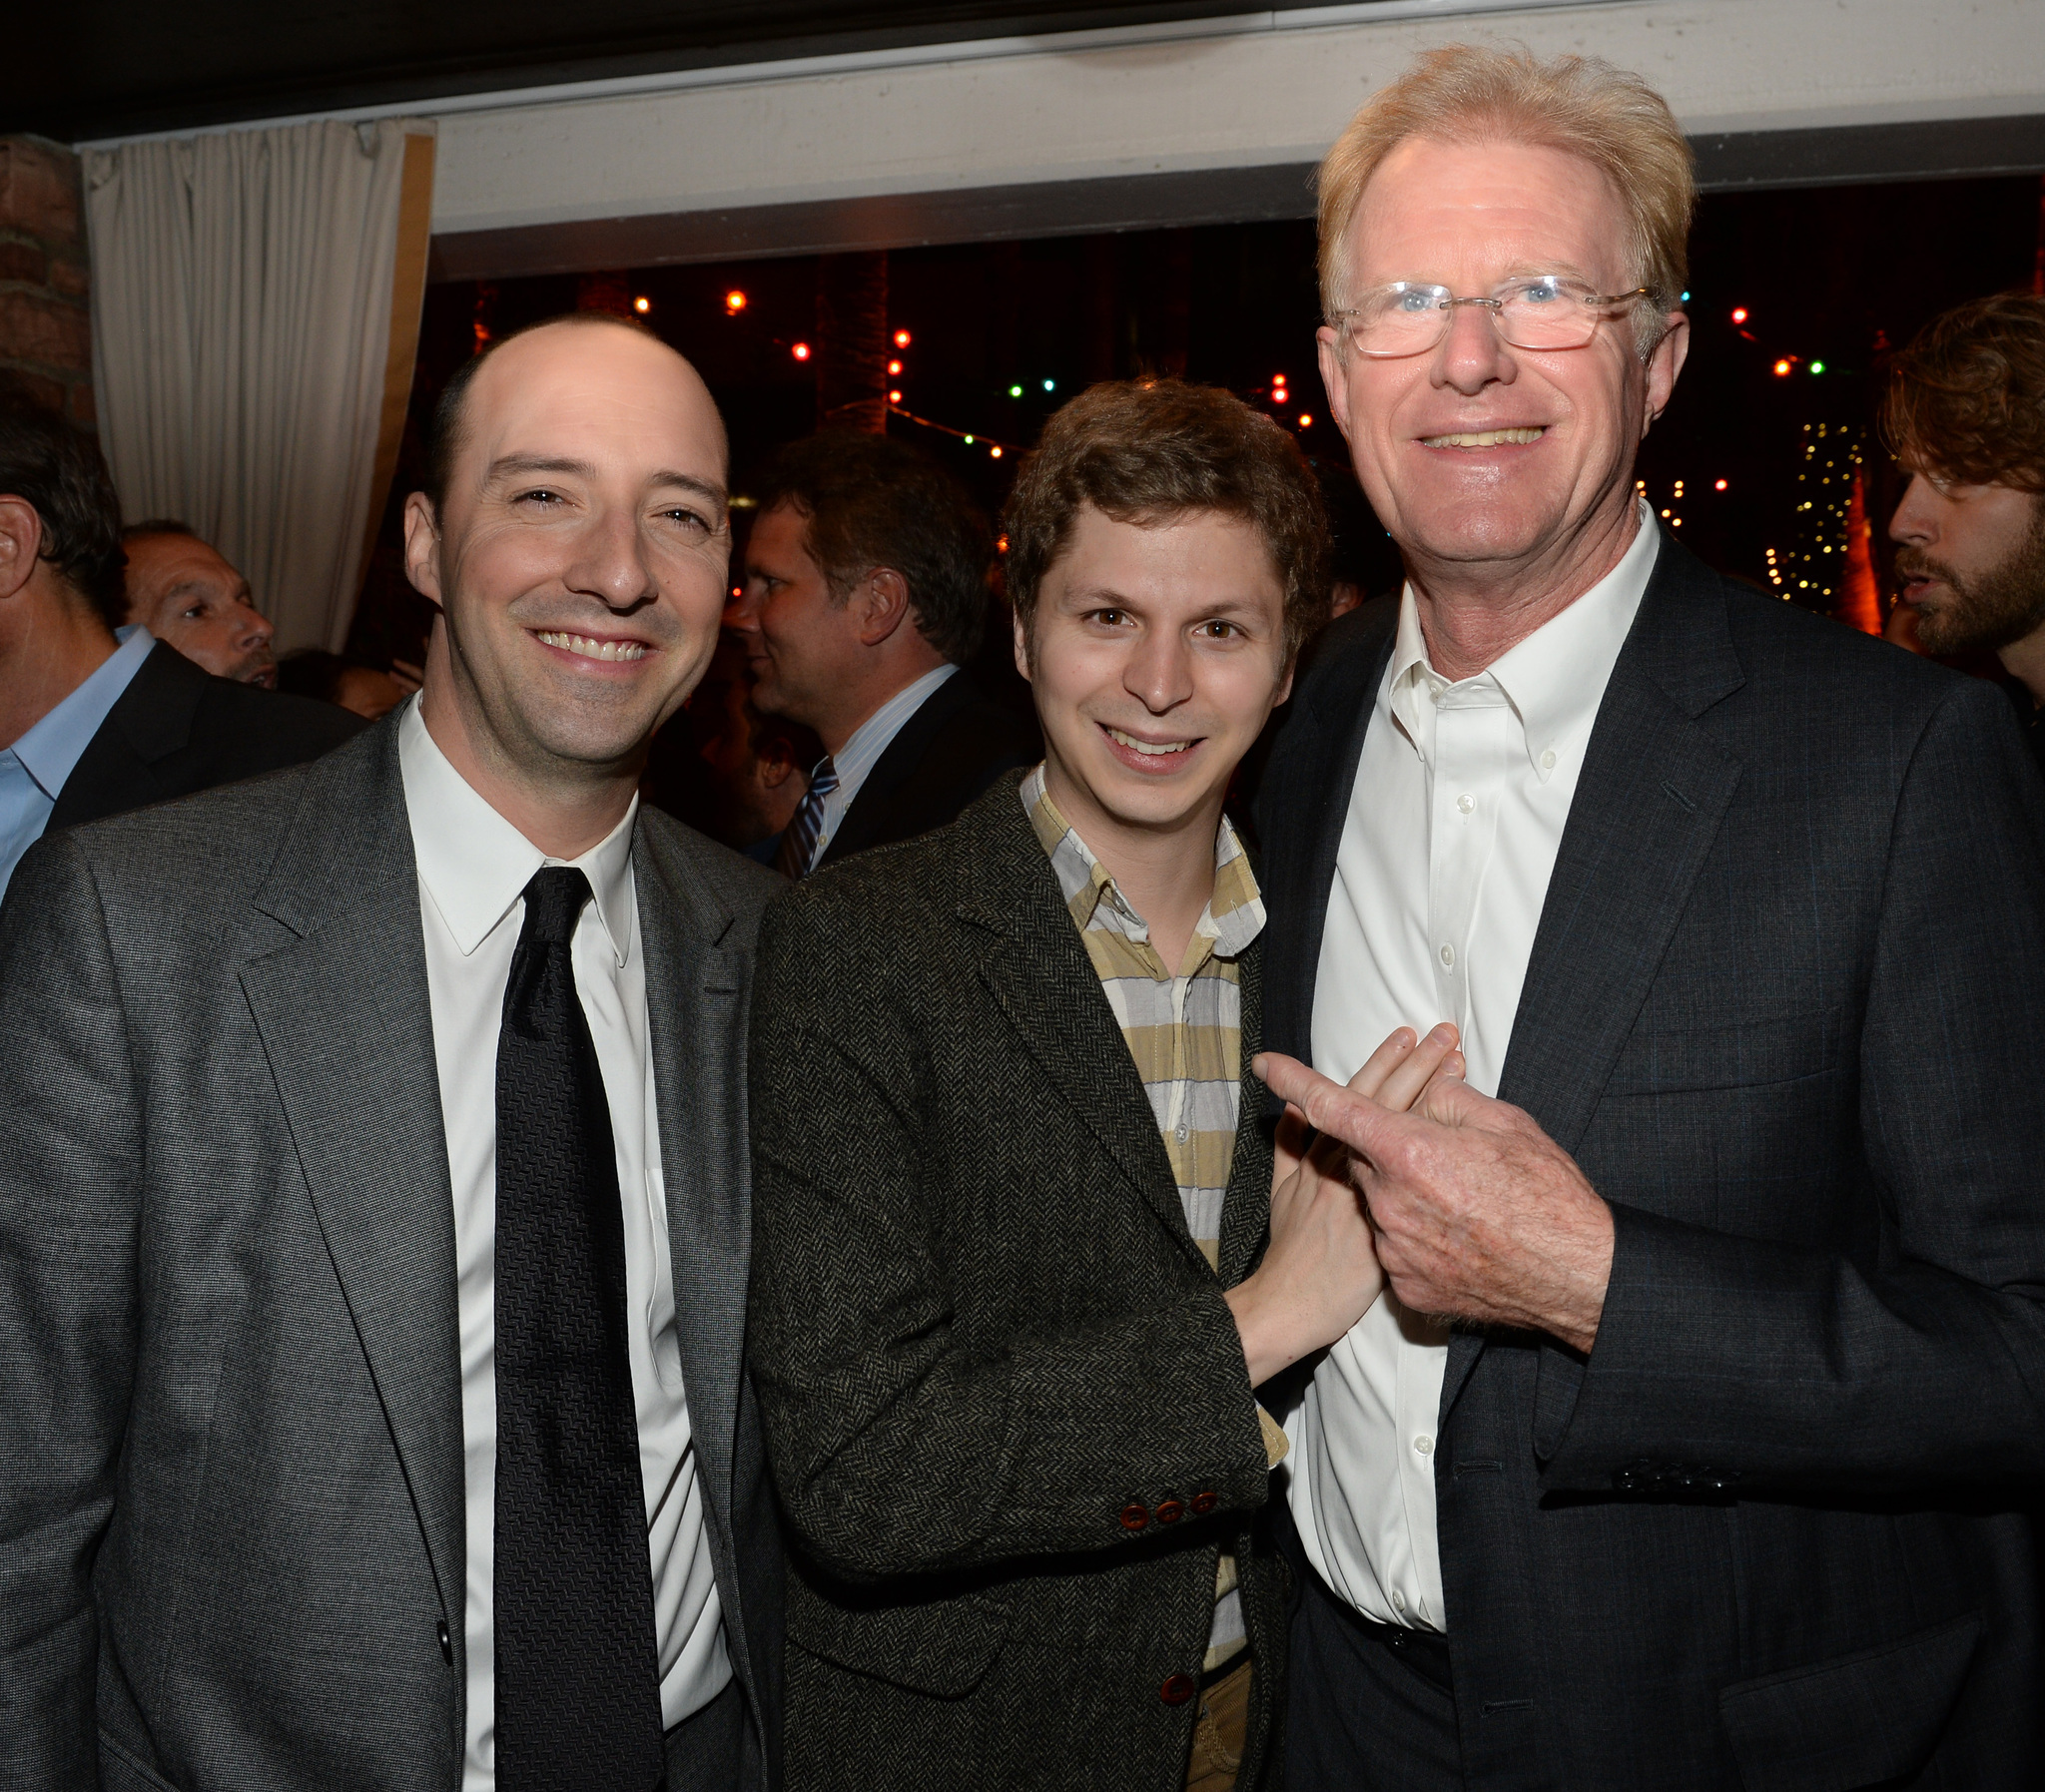 Ed Begley Jr., Michael Cera and Tony Hale at event of Arrested Development (2003)